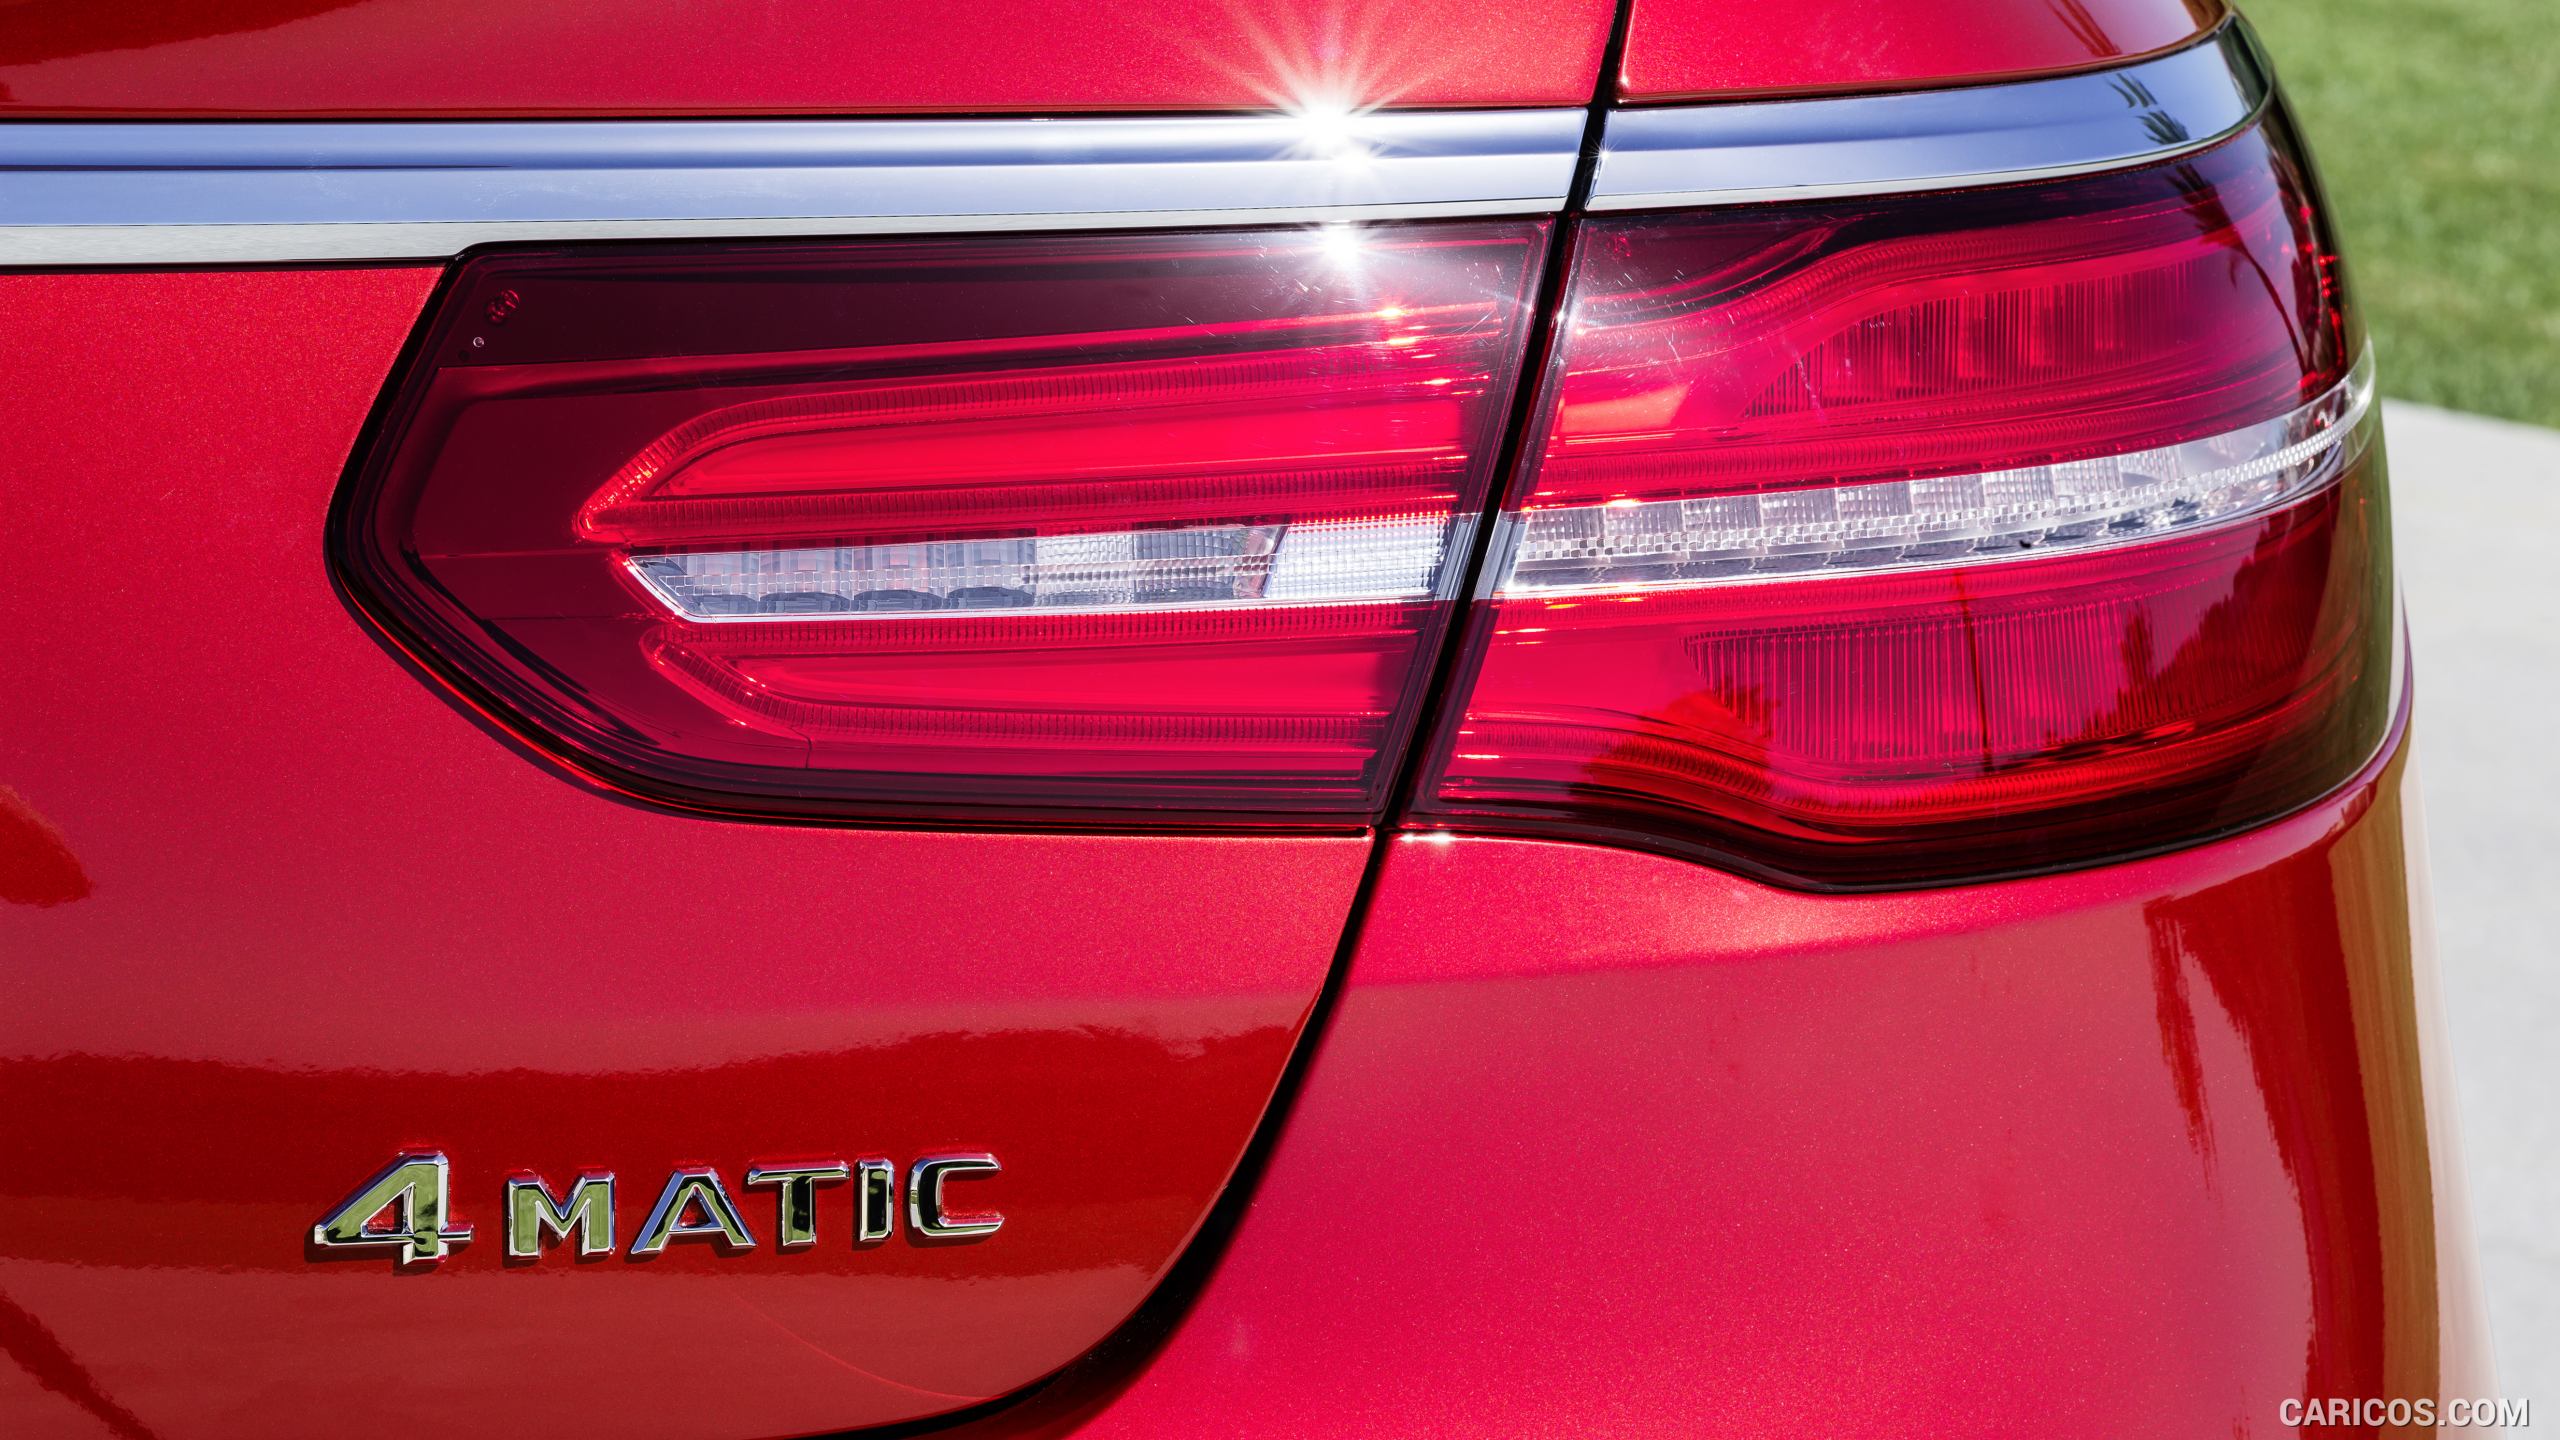 2016 Mercedes-Benz GLE 450 AMG Coupe 4MATIC (Designo Hyacinth Red Metallic) - Tail Light, #20 of 115